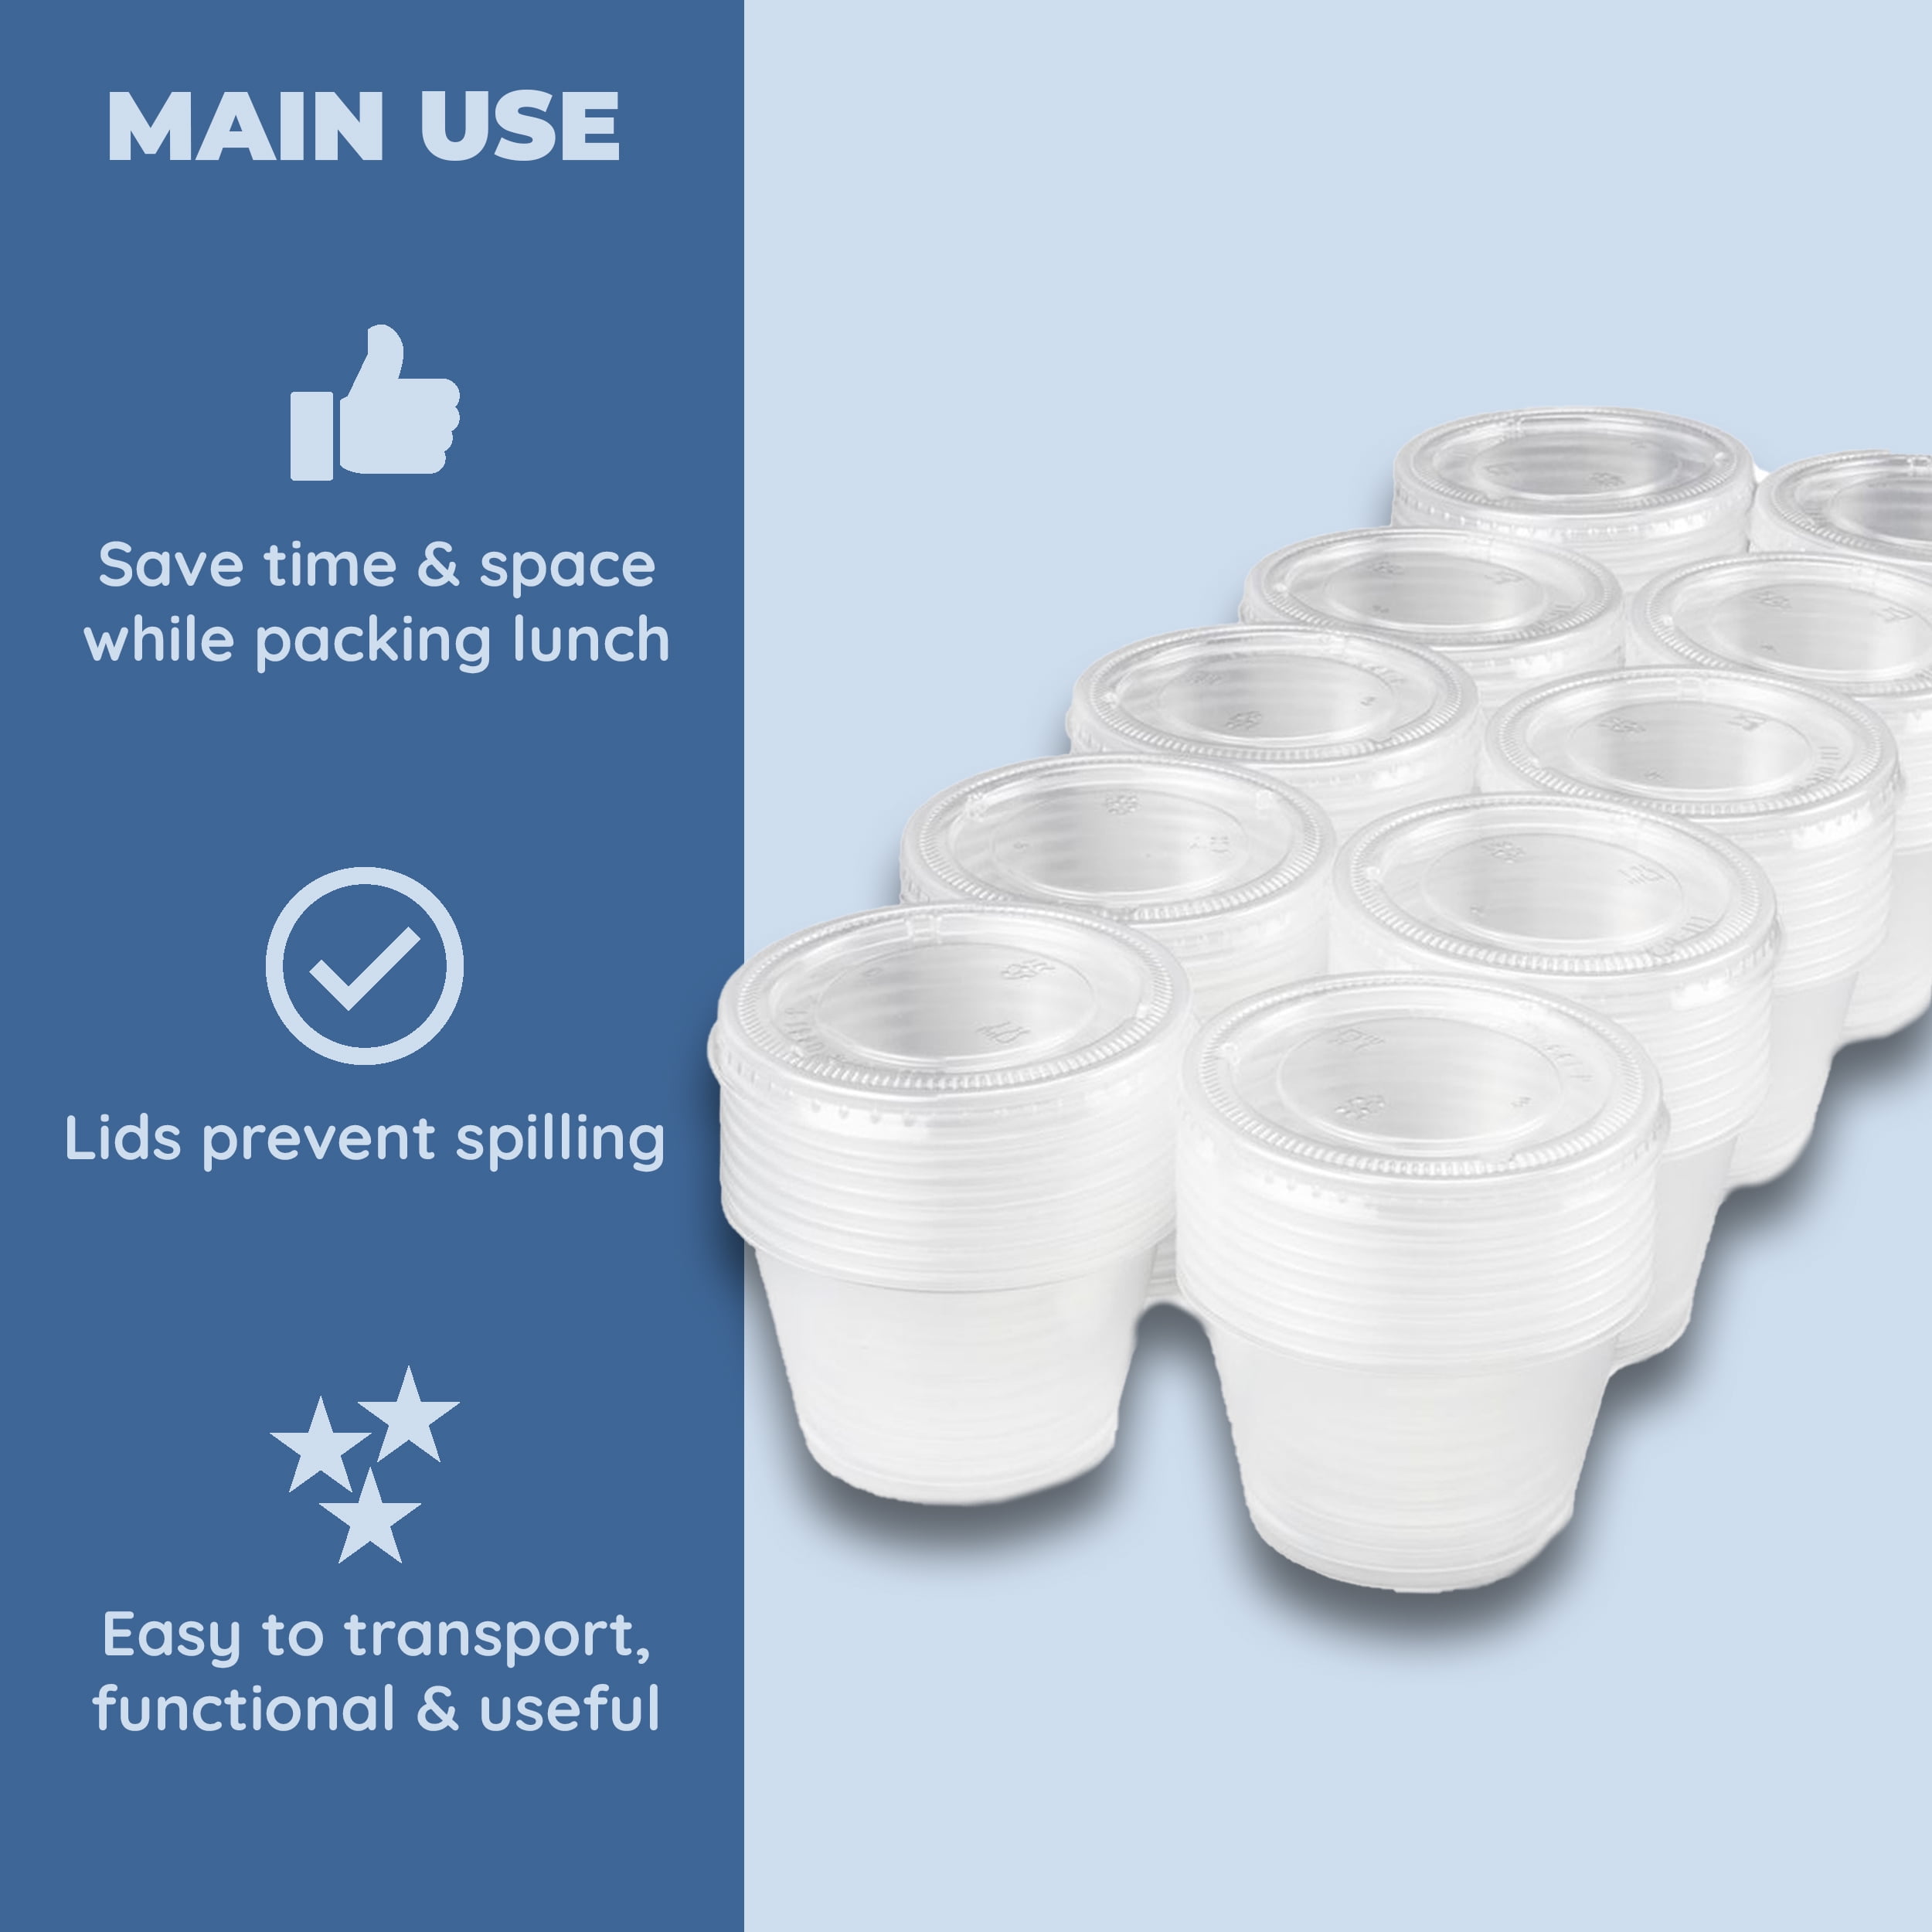 Tezzorio (100 Pack) 0.5-Ounce Plastic Portion Cups with Lids, Small  Condiment Cups/Sauce Cups, Translucent Plastic Souffle Cups/Portion  Containers